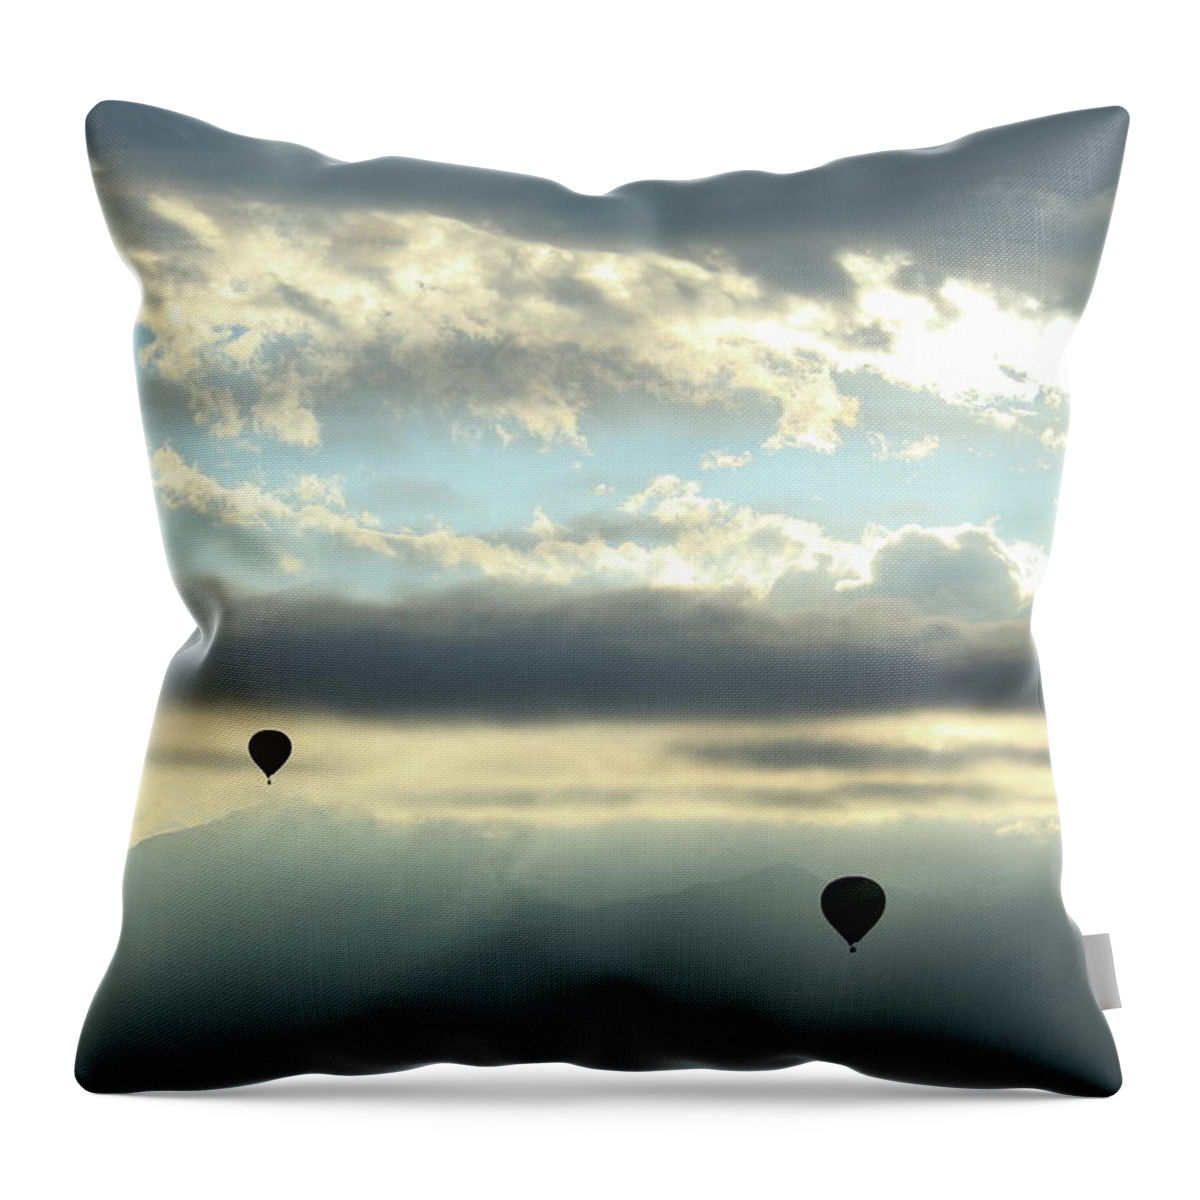 Balloon Throw Pillow featuring the photograph The Odyssey by David Diaz